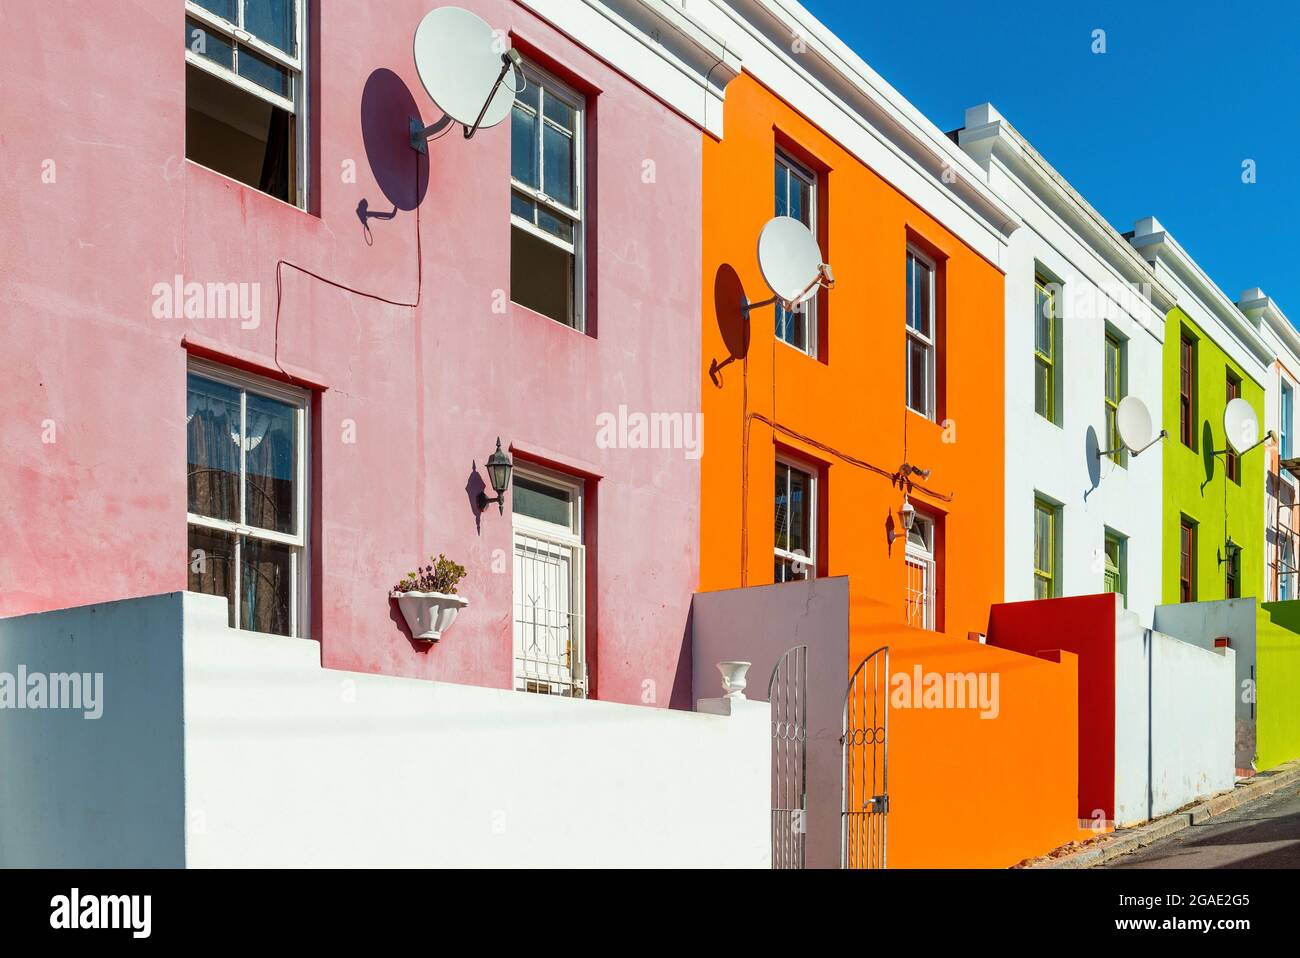 Bo Kaap malay district colorful architecture, Cape Town, South Africa. Stock Photo